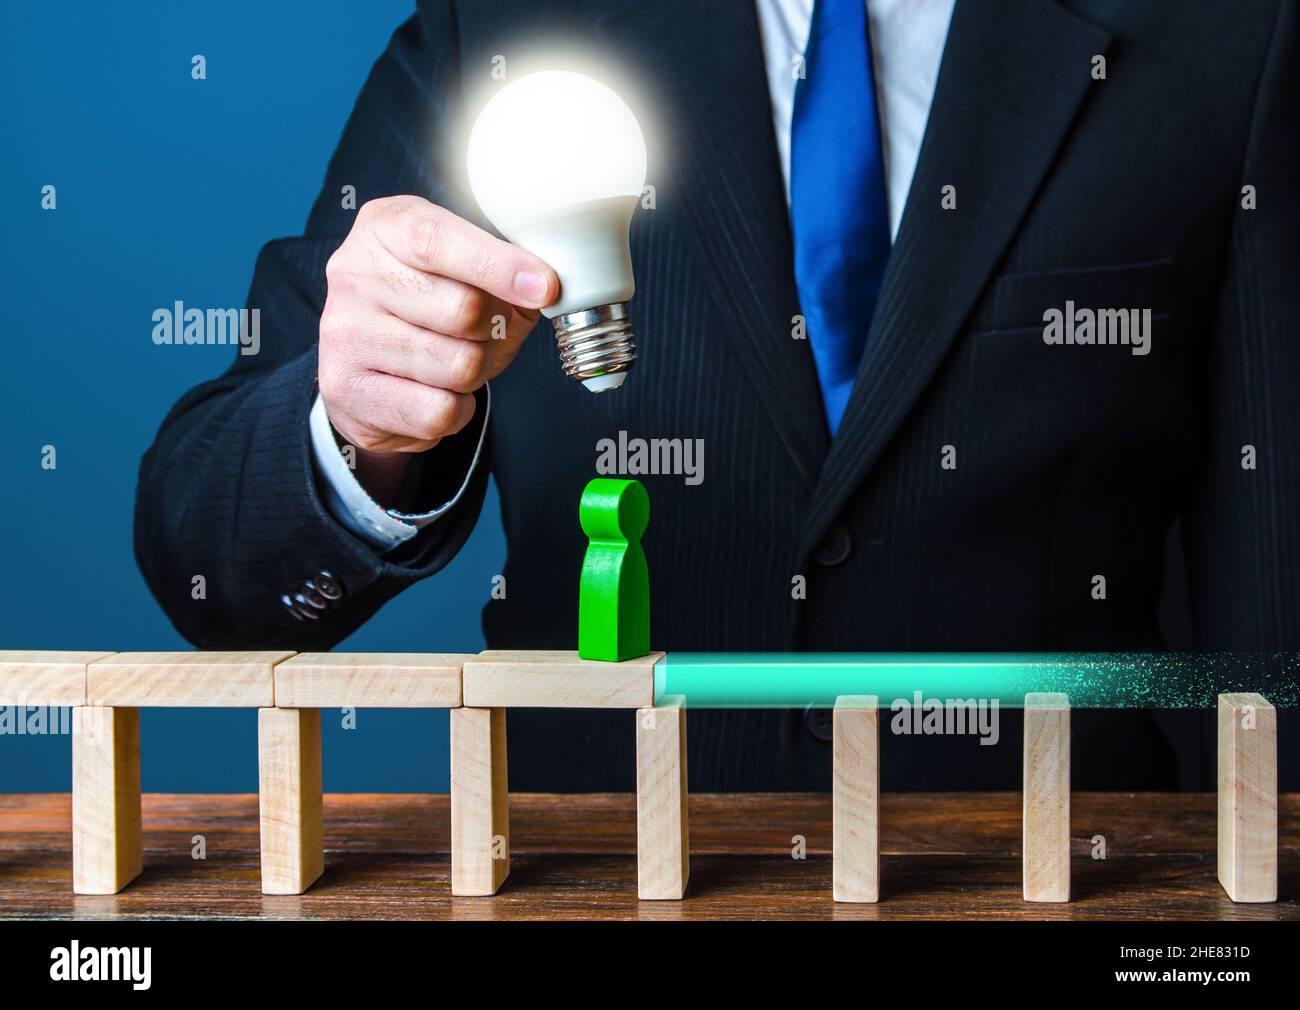 Mentor helps to build a further path. Idea development and startup. Lead guiding. Professional education. Way to success. Business planning. Innovatio Stock Photo